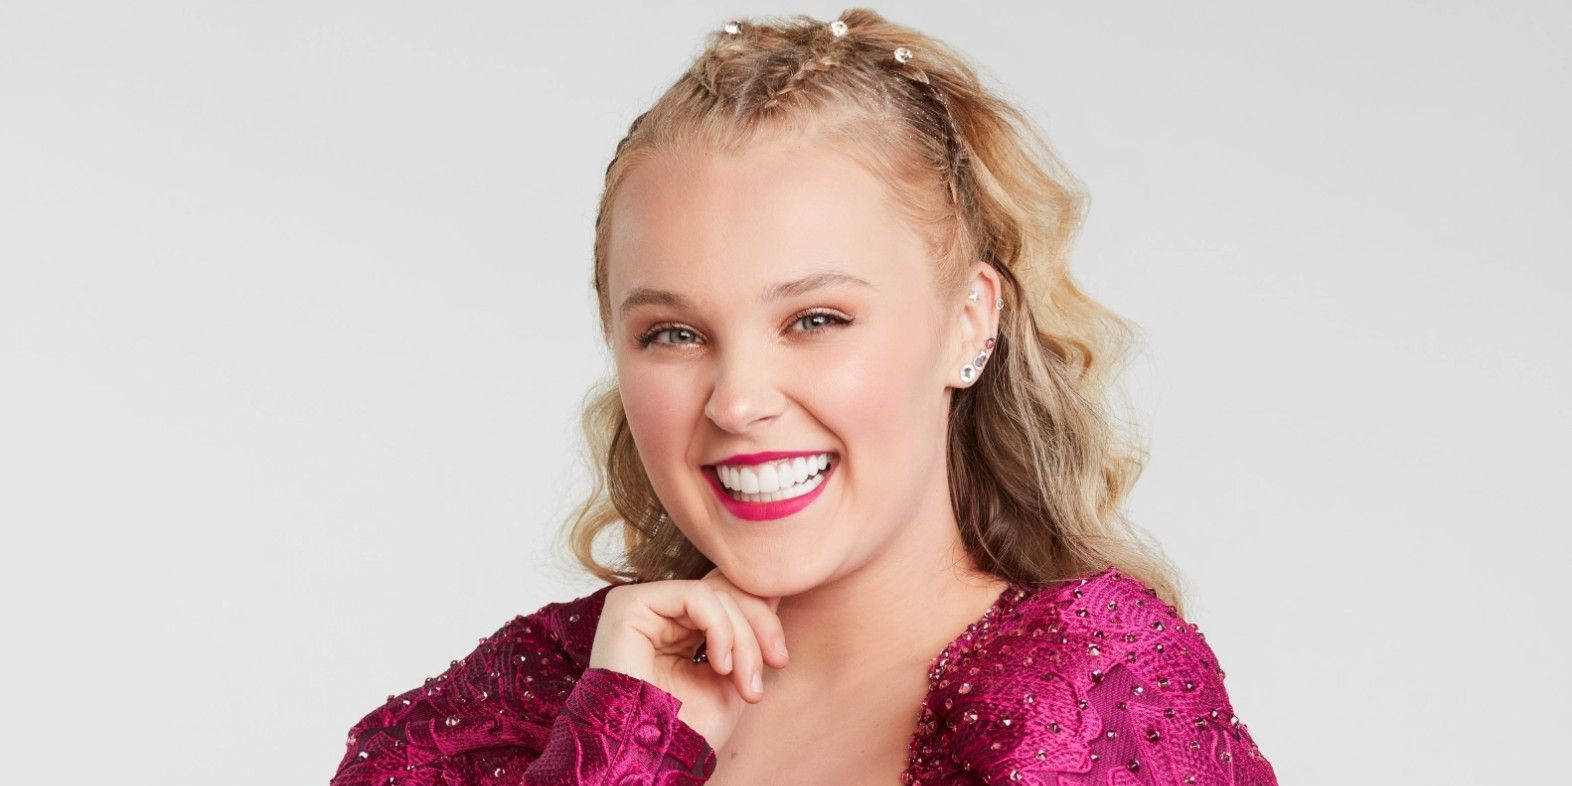 Jojo Siwa in a pink dress from the DWTS promo shoot.